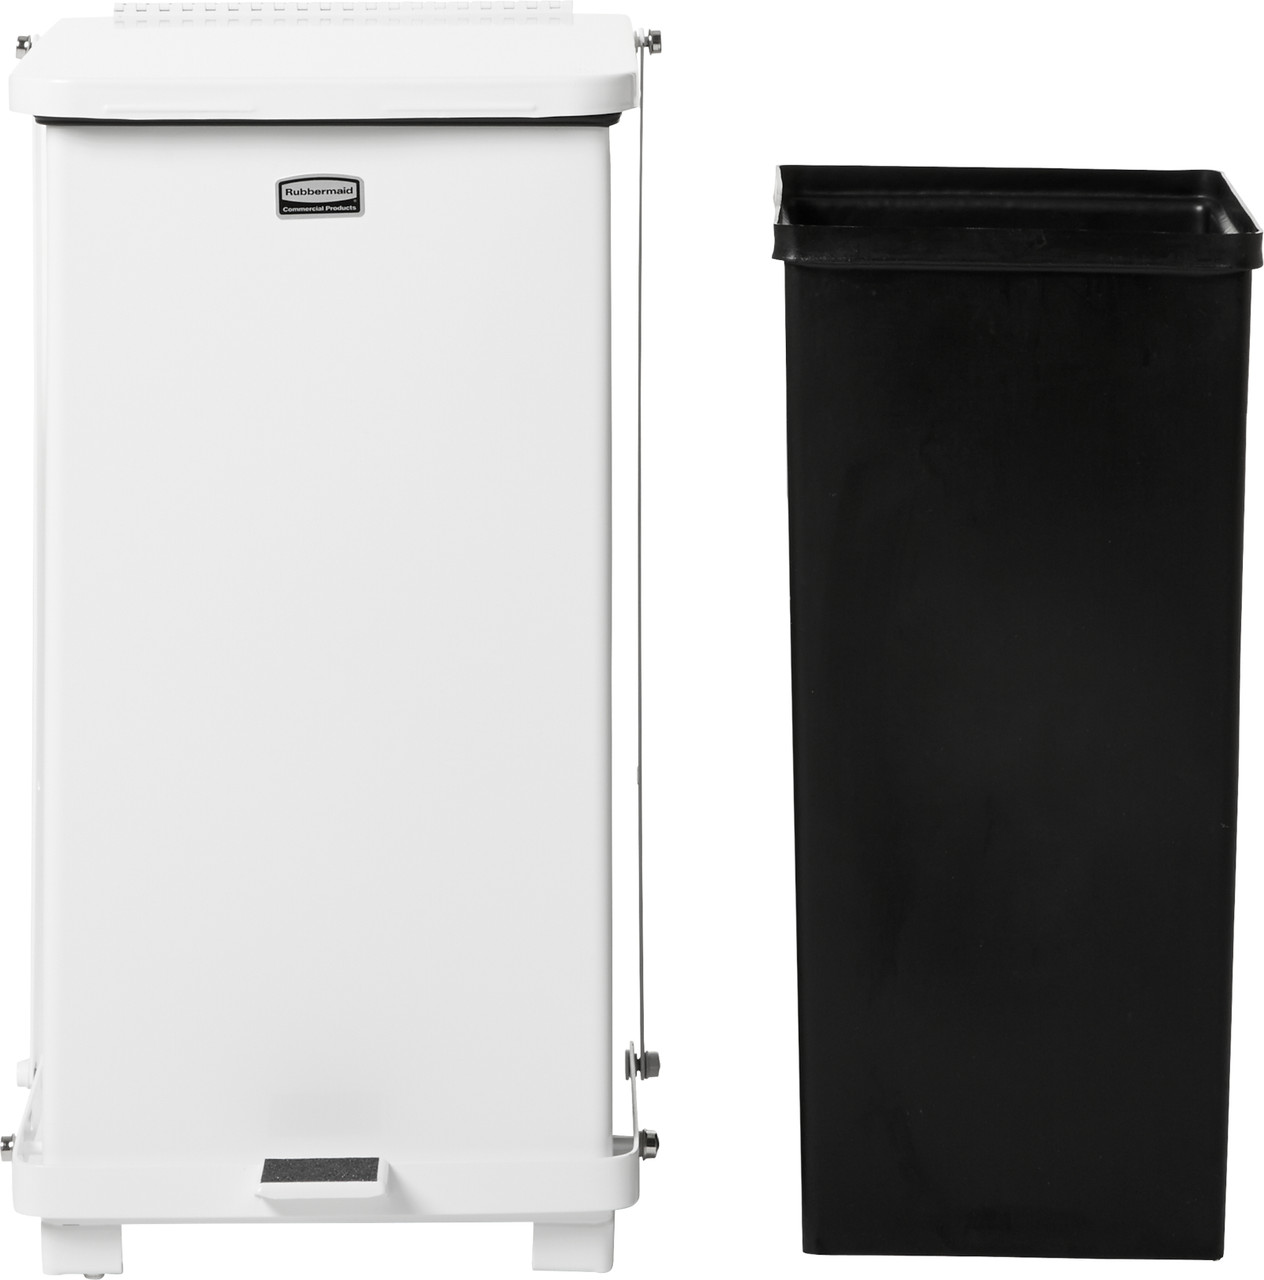 FGST12EPLWH - Rubbermaid Defender Pedal Bin body with plastic liner placed next to it